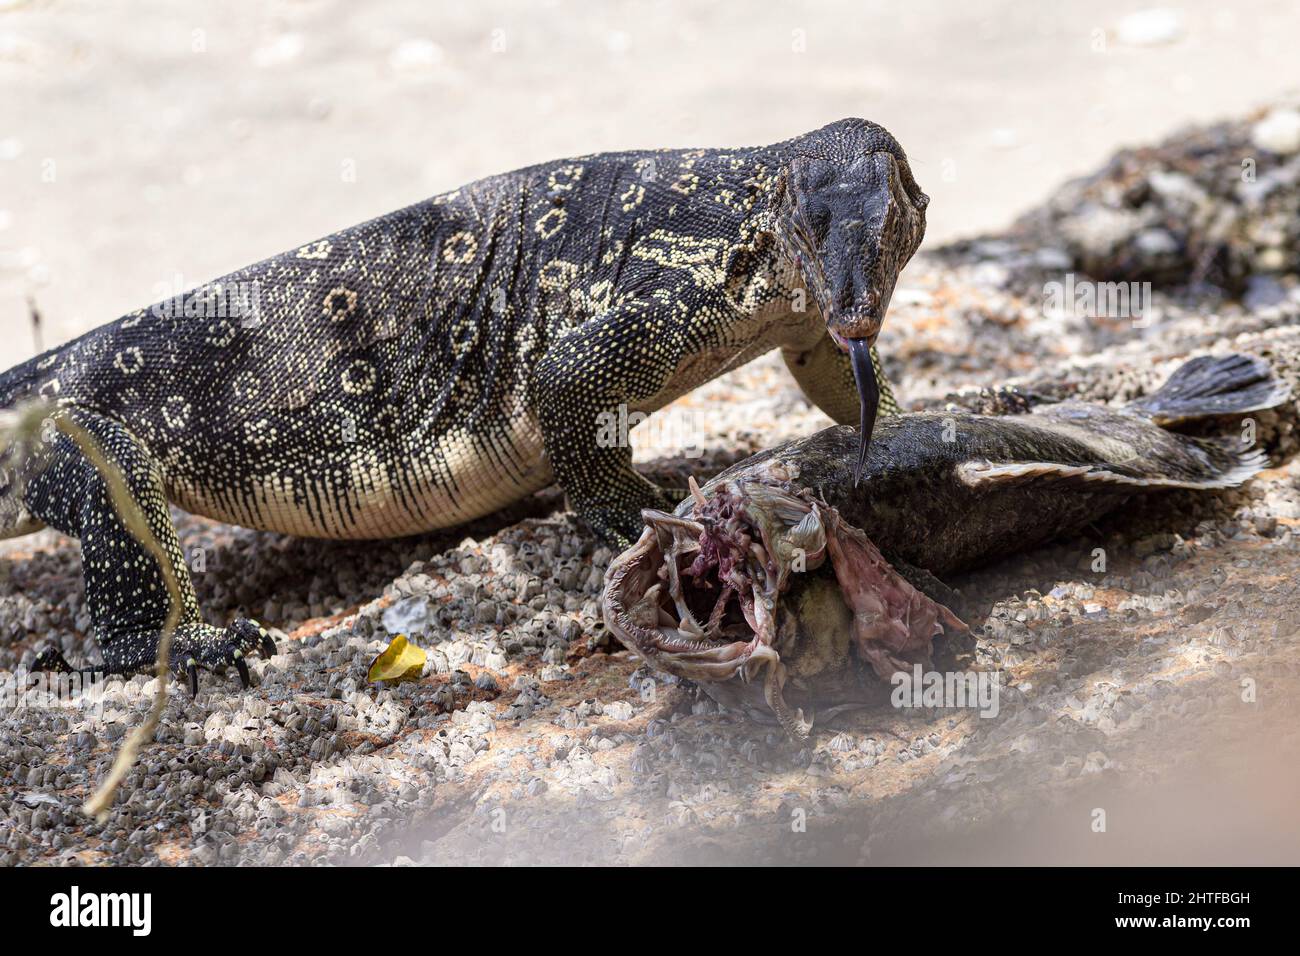 Spotted nile monitor eating its pray on the coast Stock Photo